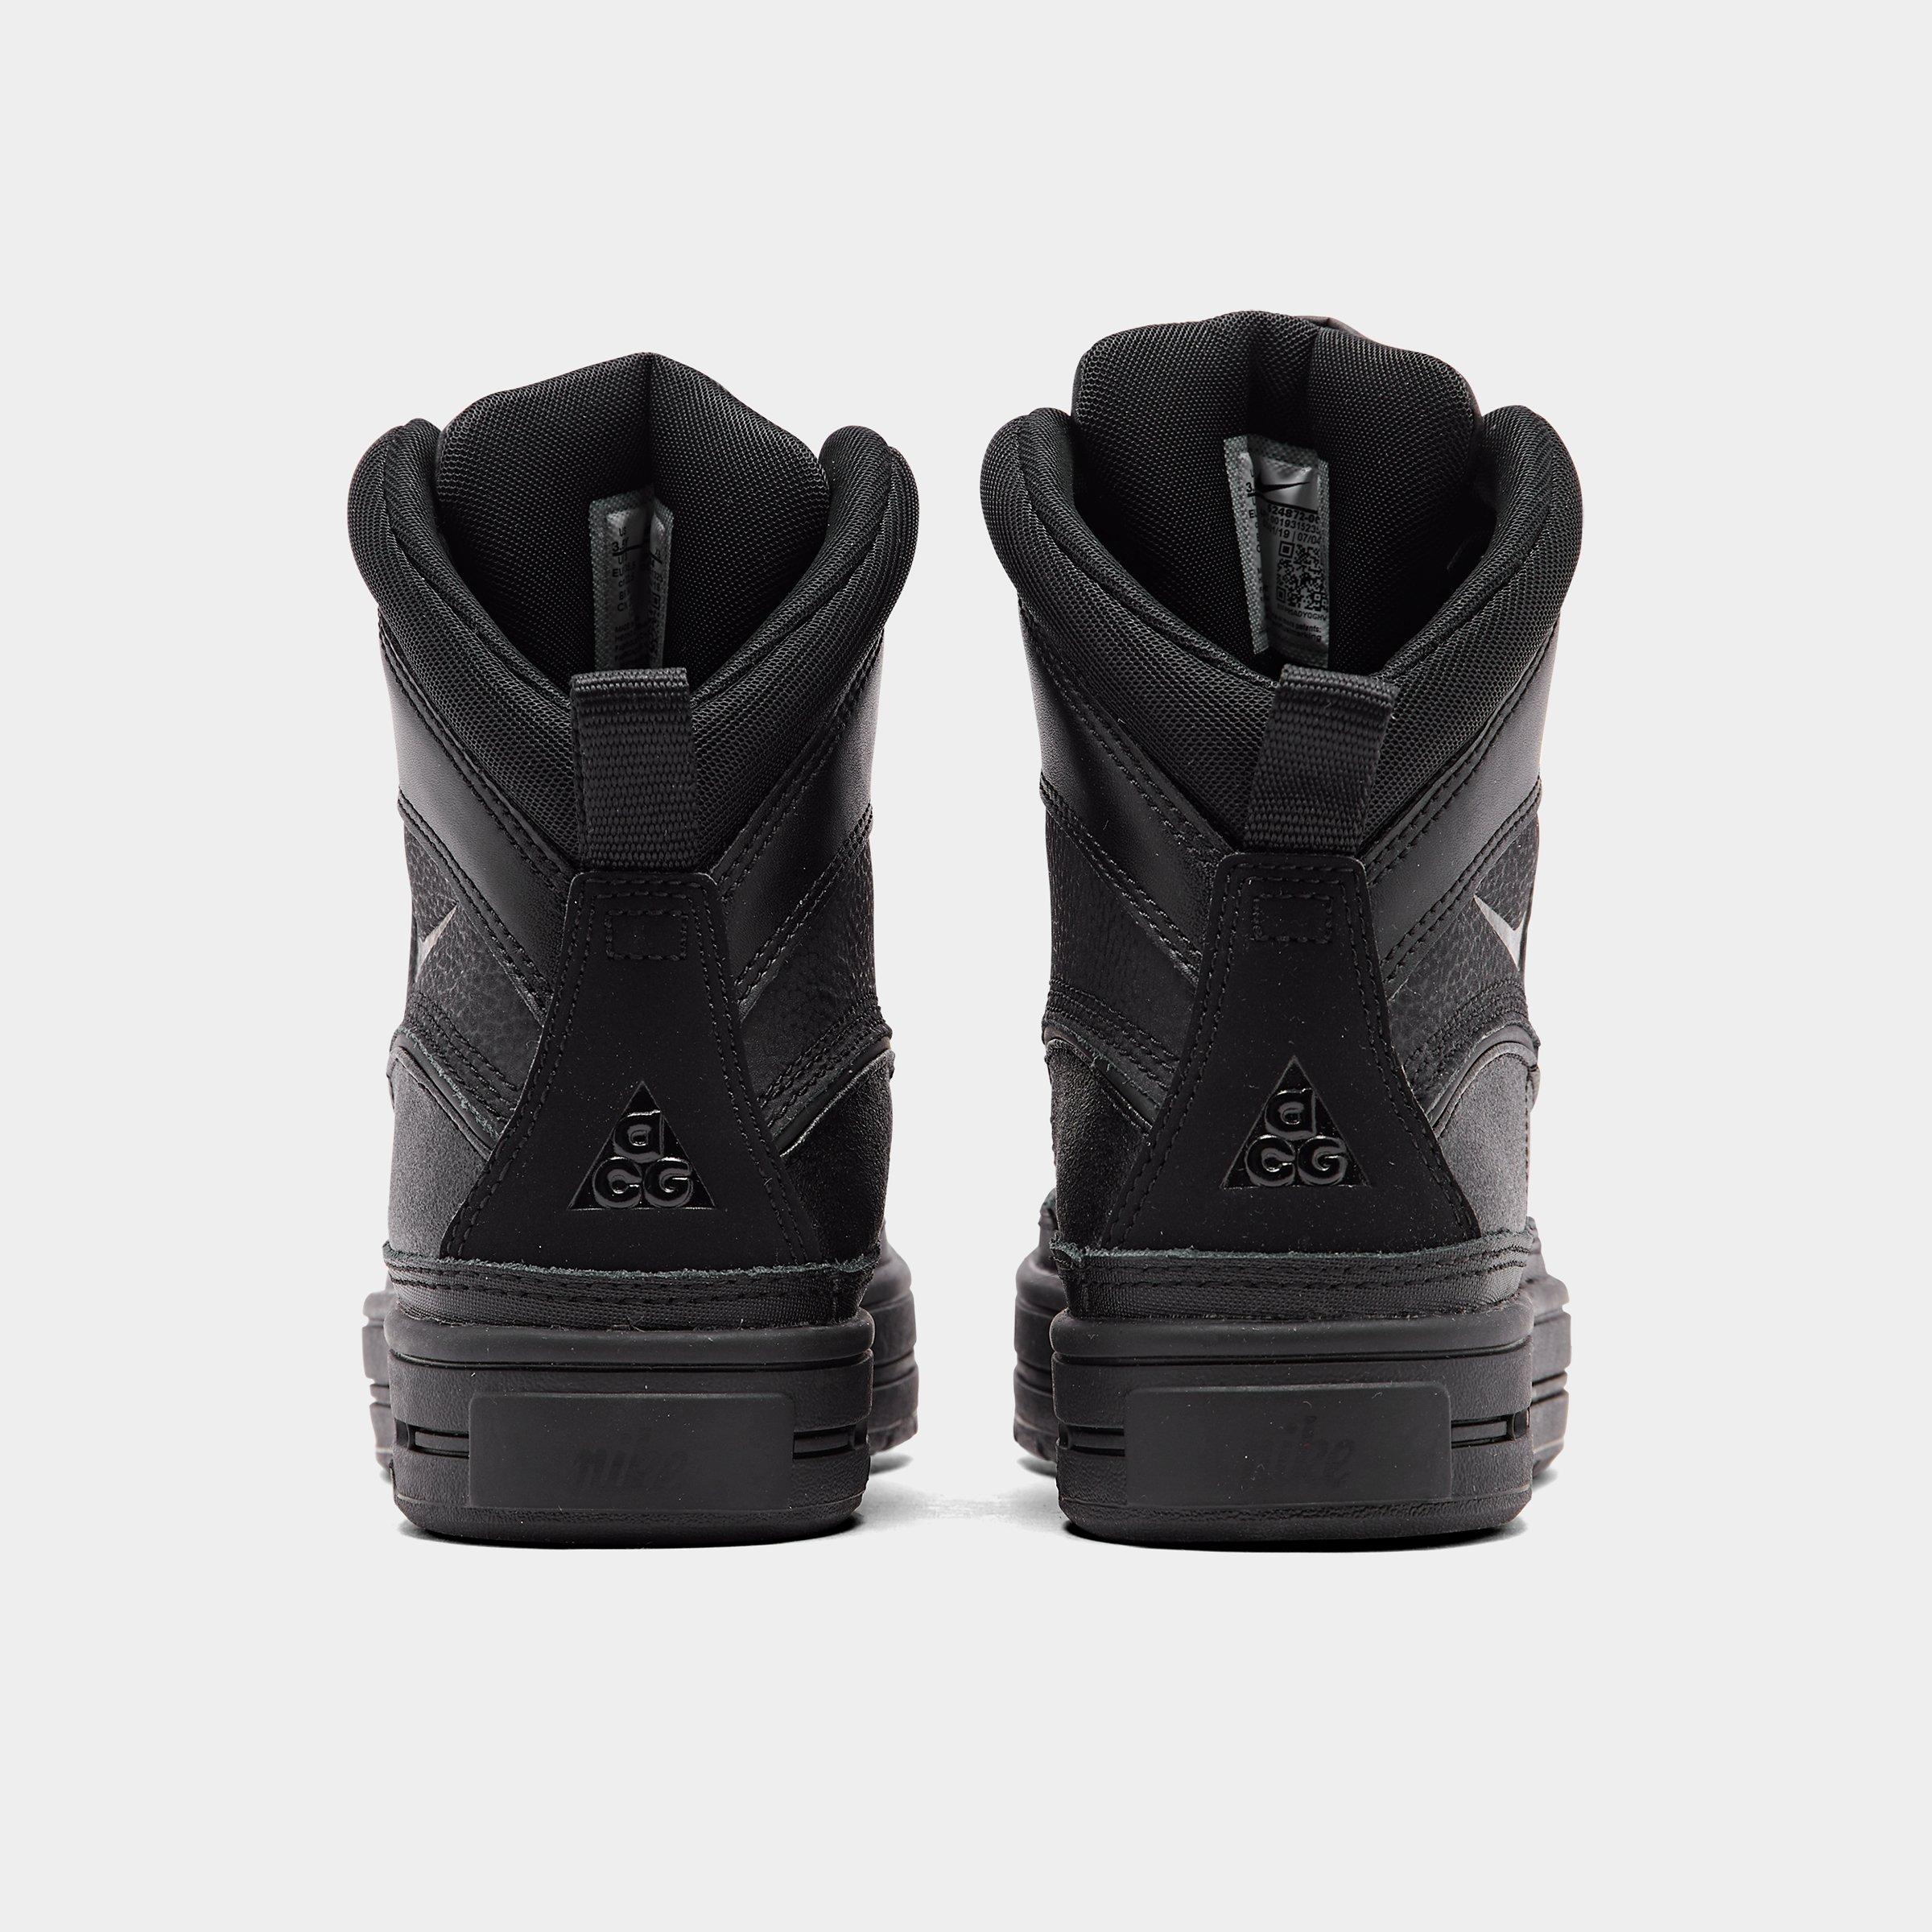 acg boots without bubble